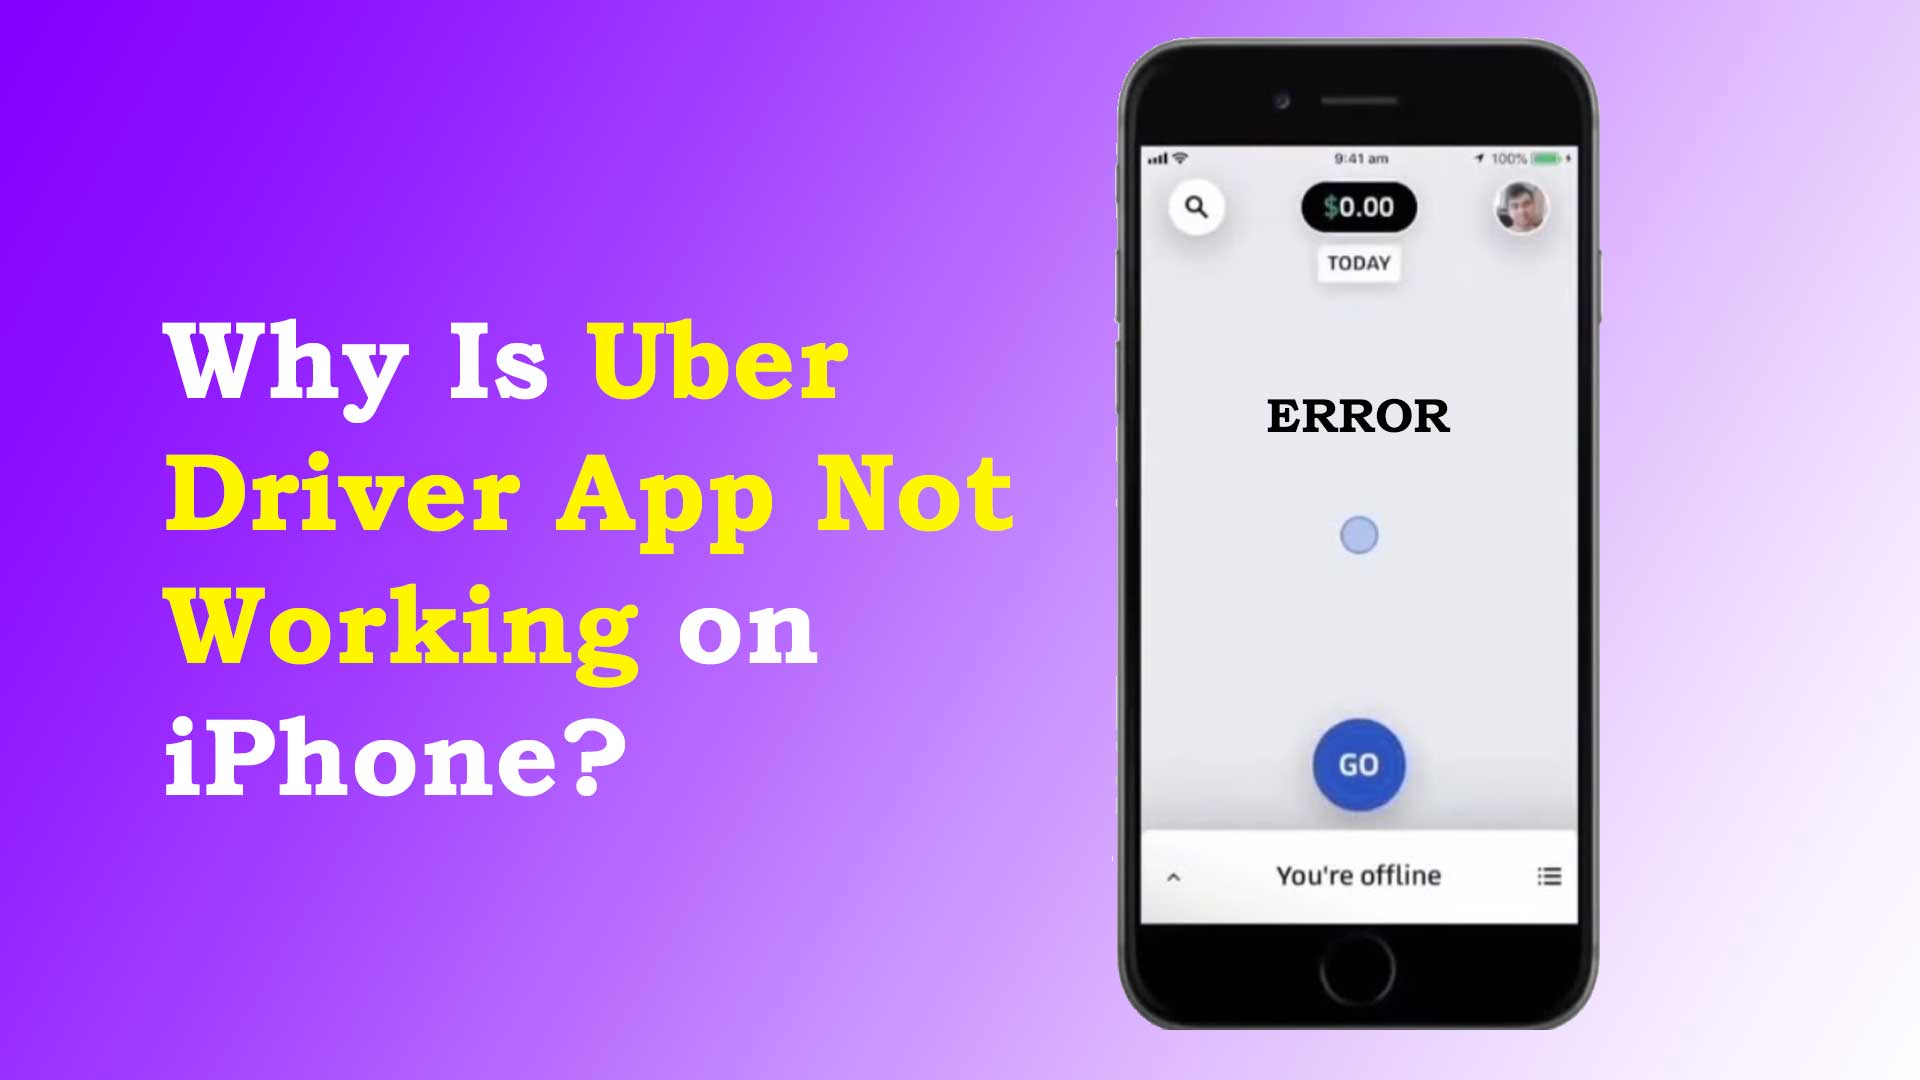 Why Is Uber Driver App Not Working on iPhone?